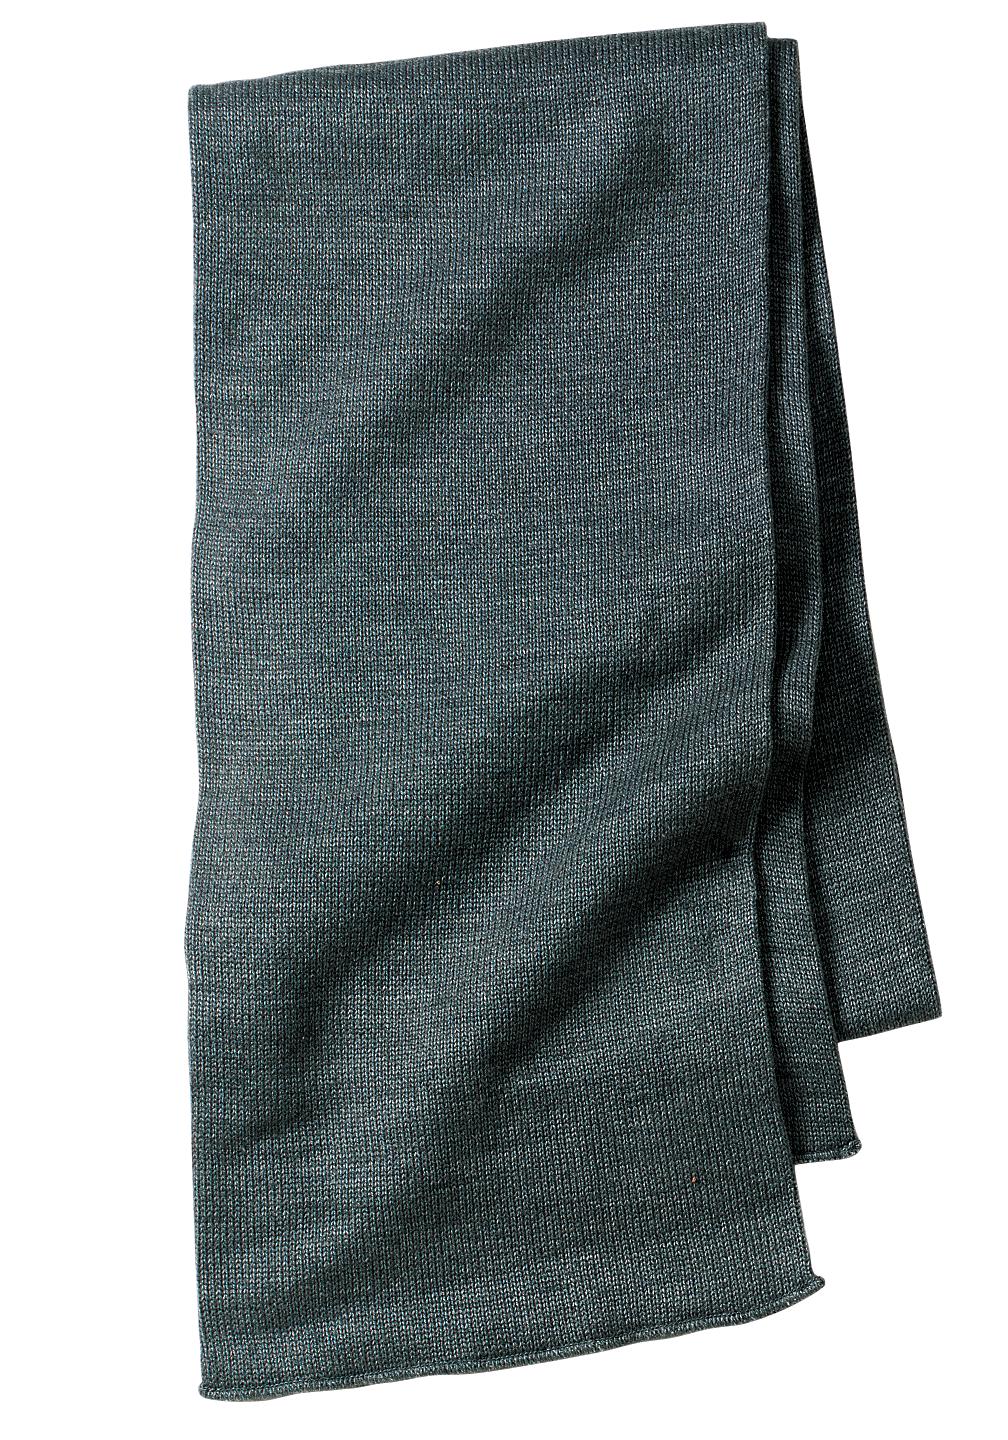 Port & Company - Knitted Scarf.  KS01